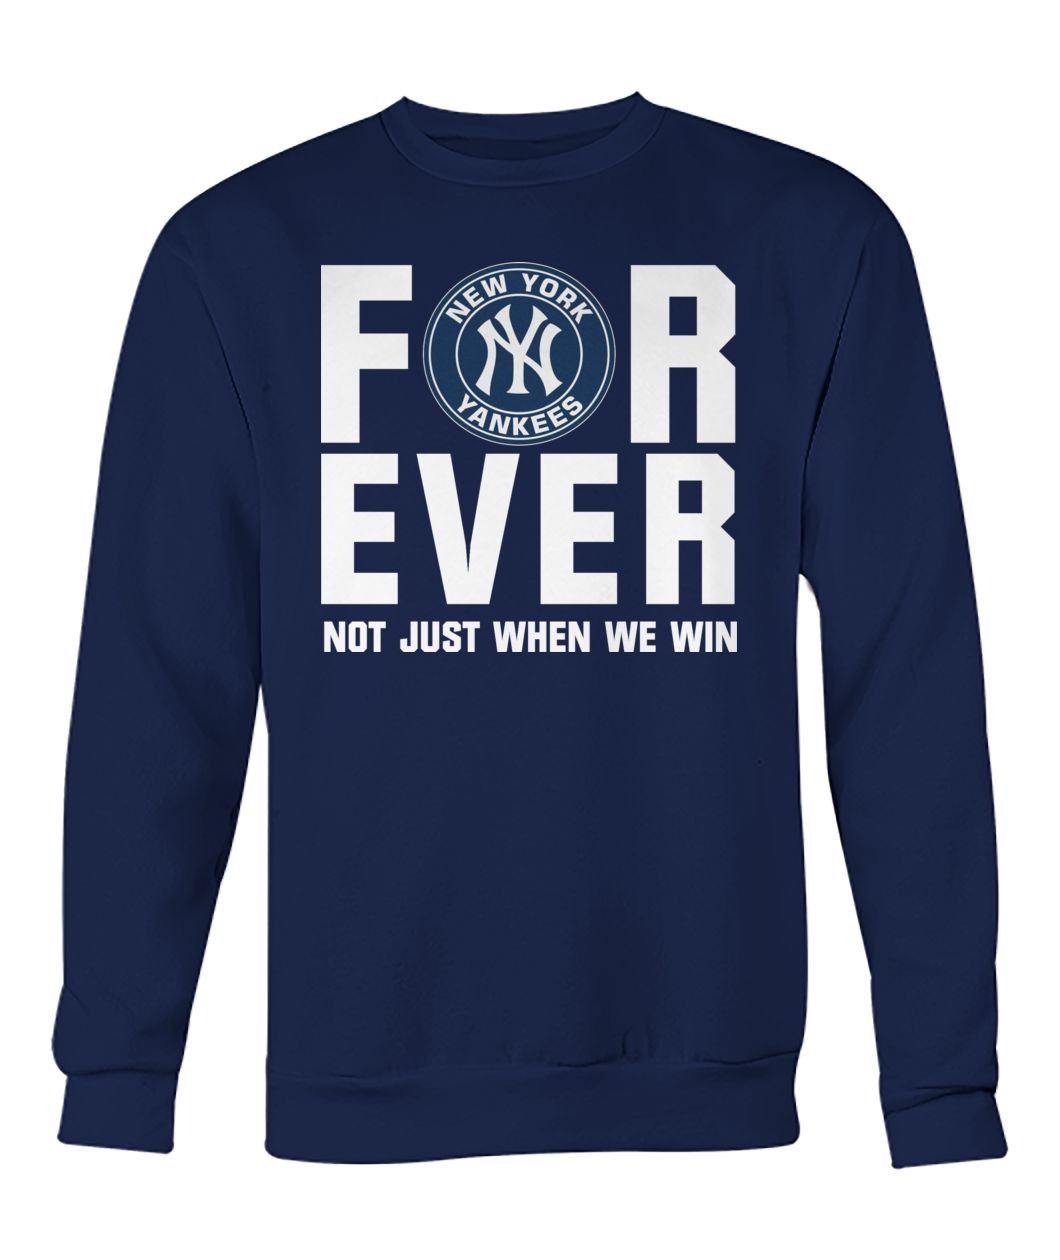 New York Yankees forever not just when we win shirt 3